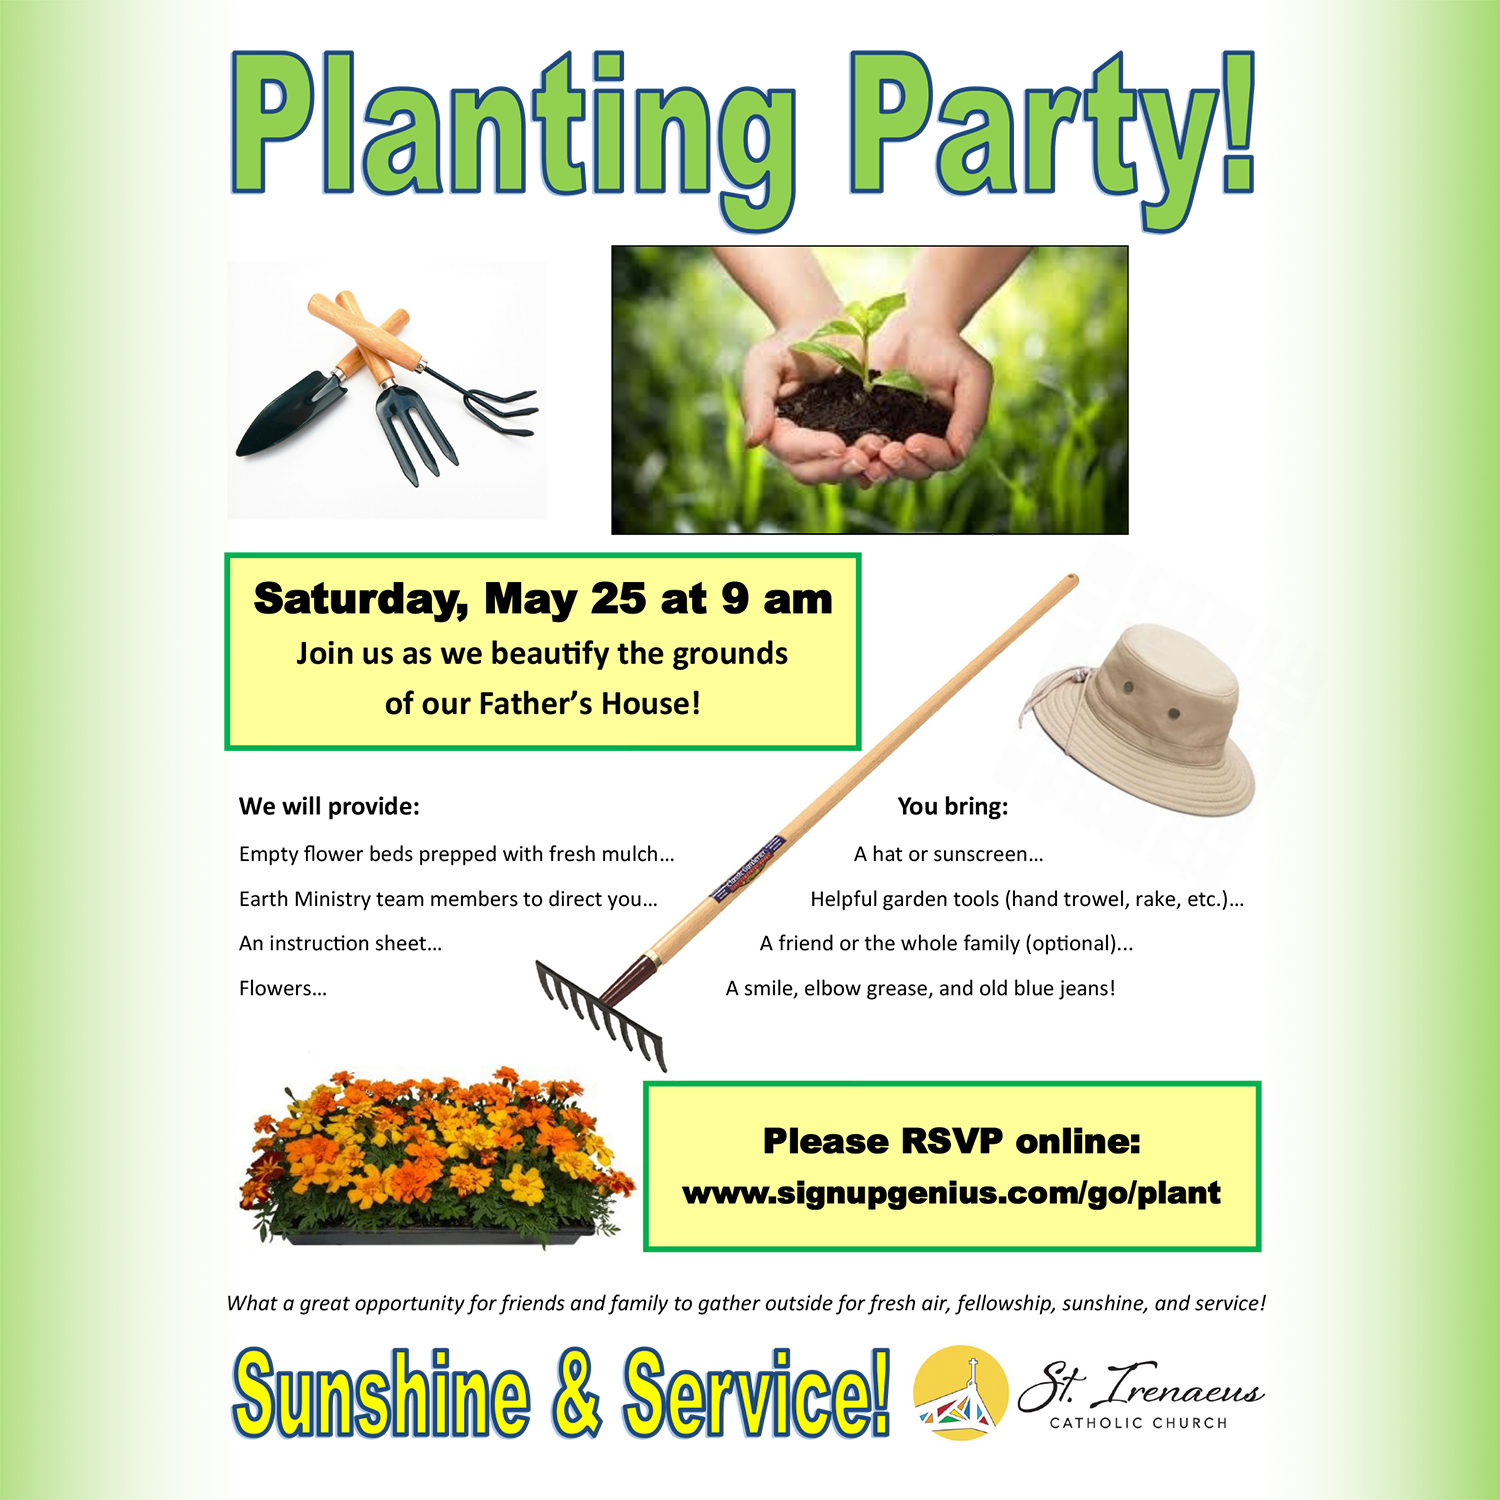 Planting Party at St. Irenaeus grounds